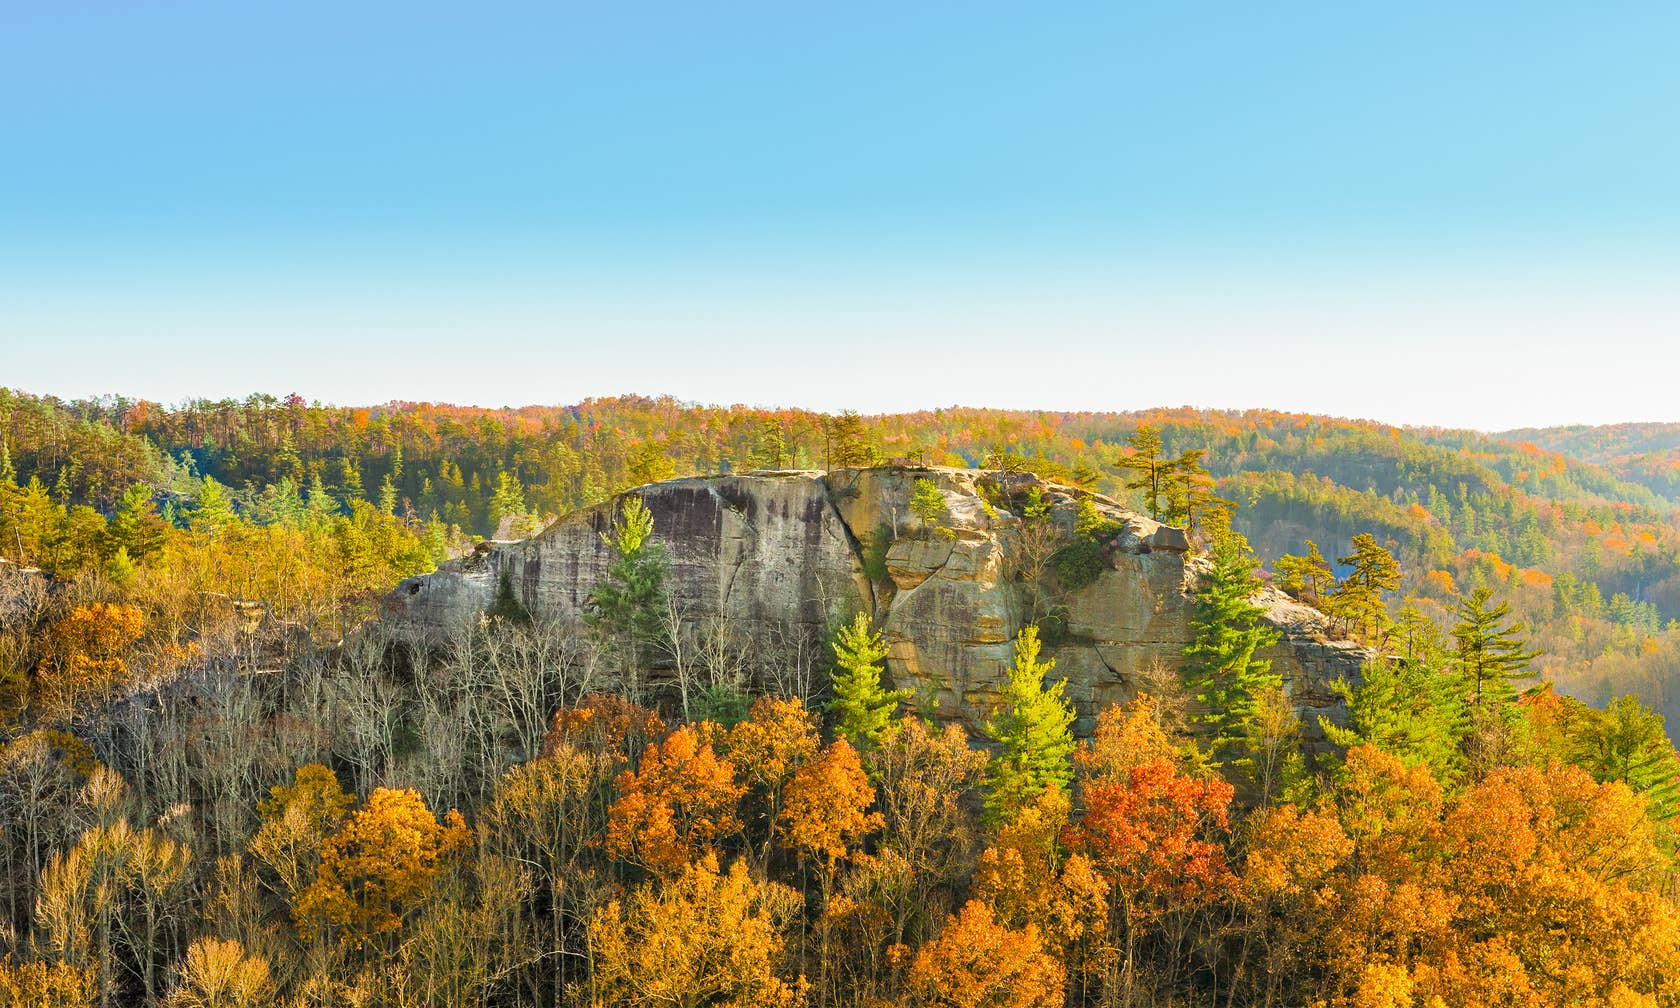 Holiday rentals in Red River Gorge